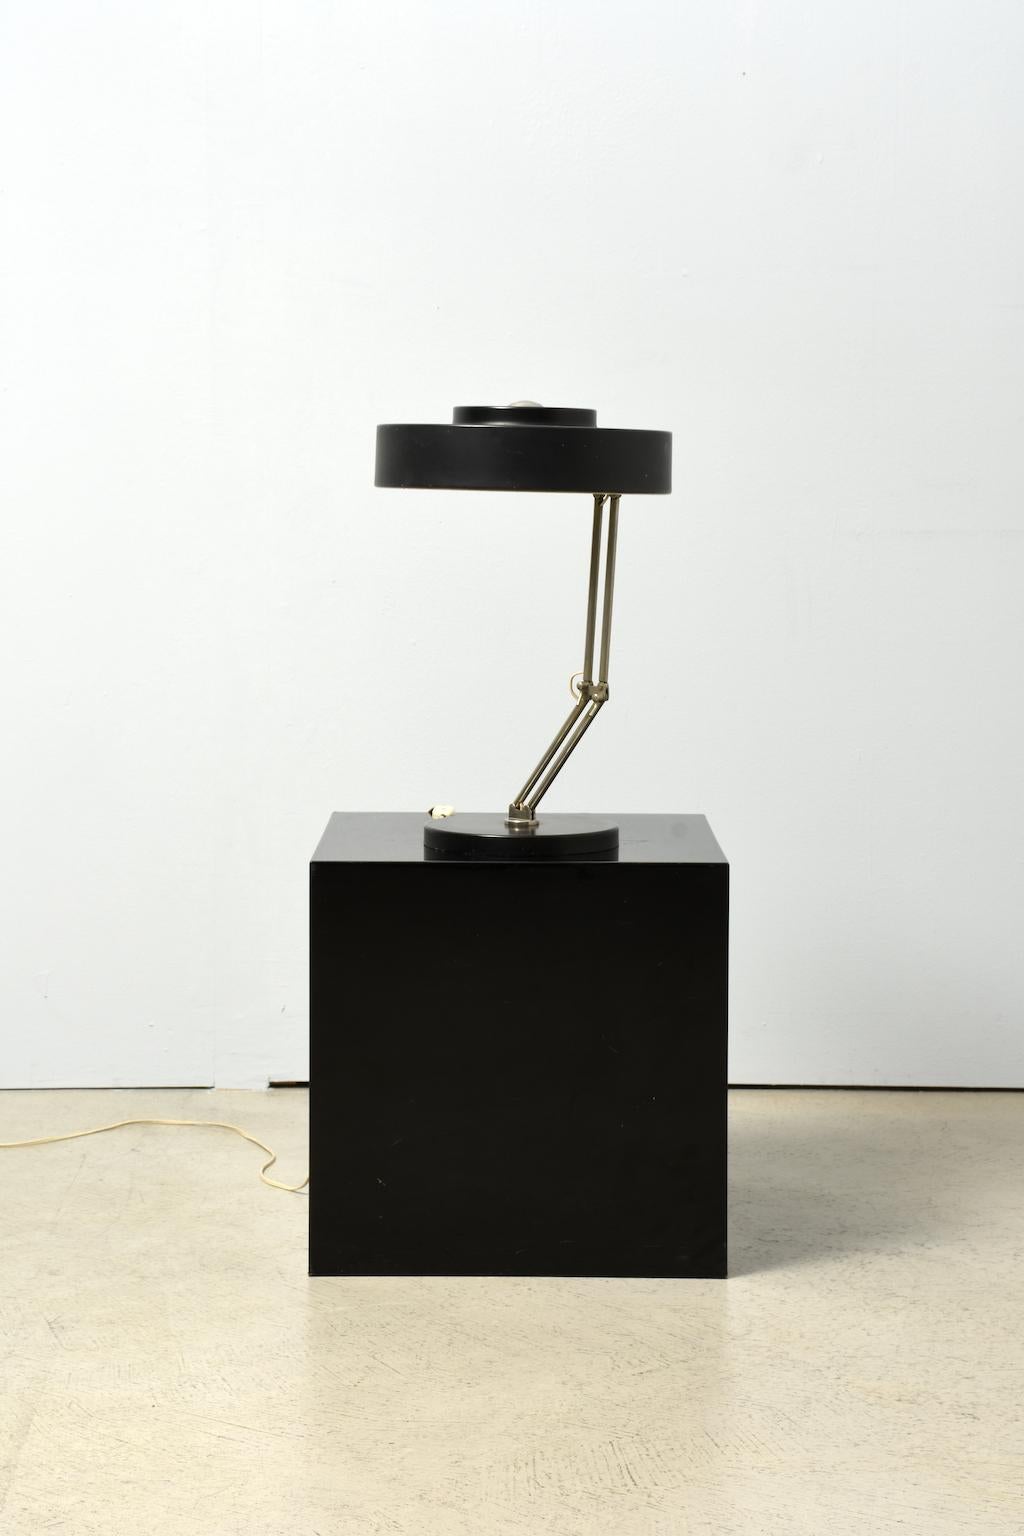 Mid-Century Modern Table Lamp 1960s Black Painted Sheet Metal with Adjustable Joint Bar in Chrome